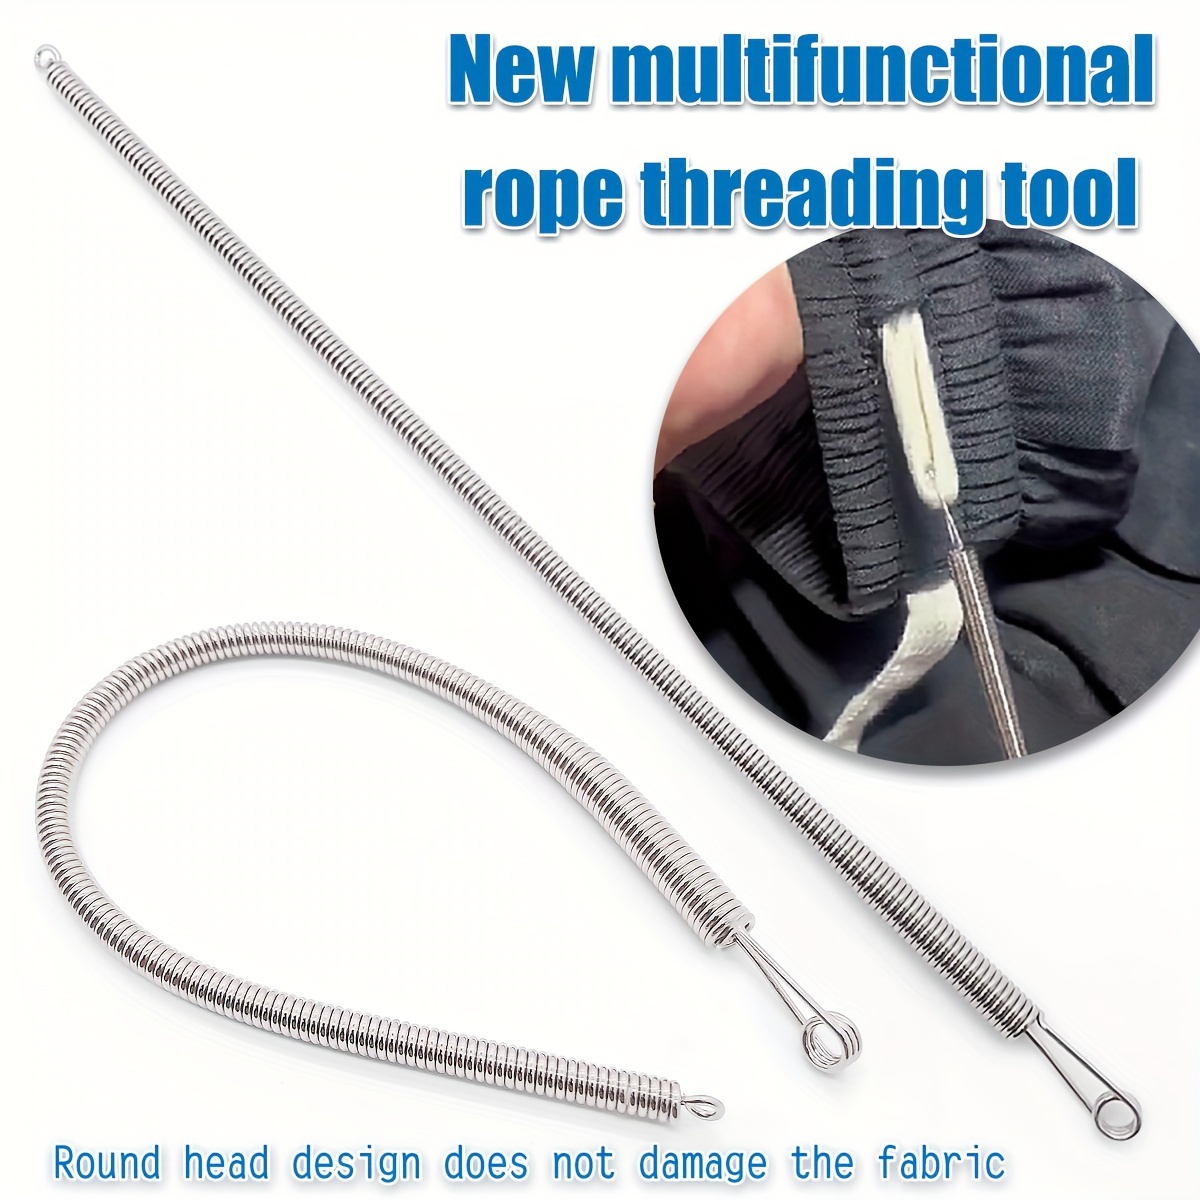 

1pc Flexible Spring Rope Threading Tool - Silver Grey Needle Threader For Drawstrings, Elastic Bands, And Crafts - No Battery Required